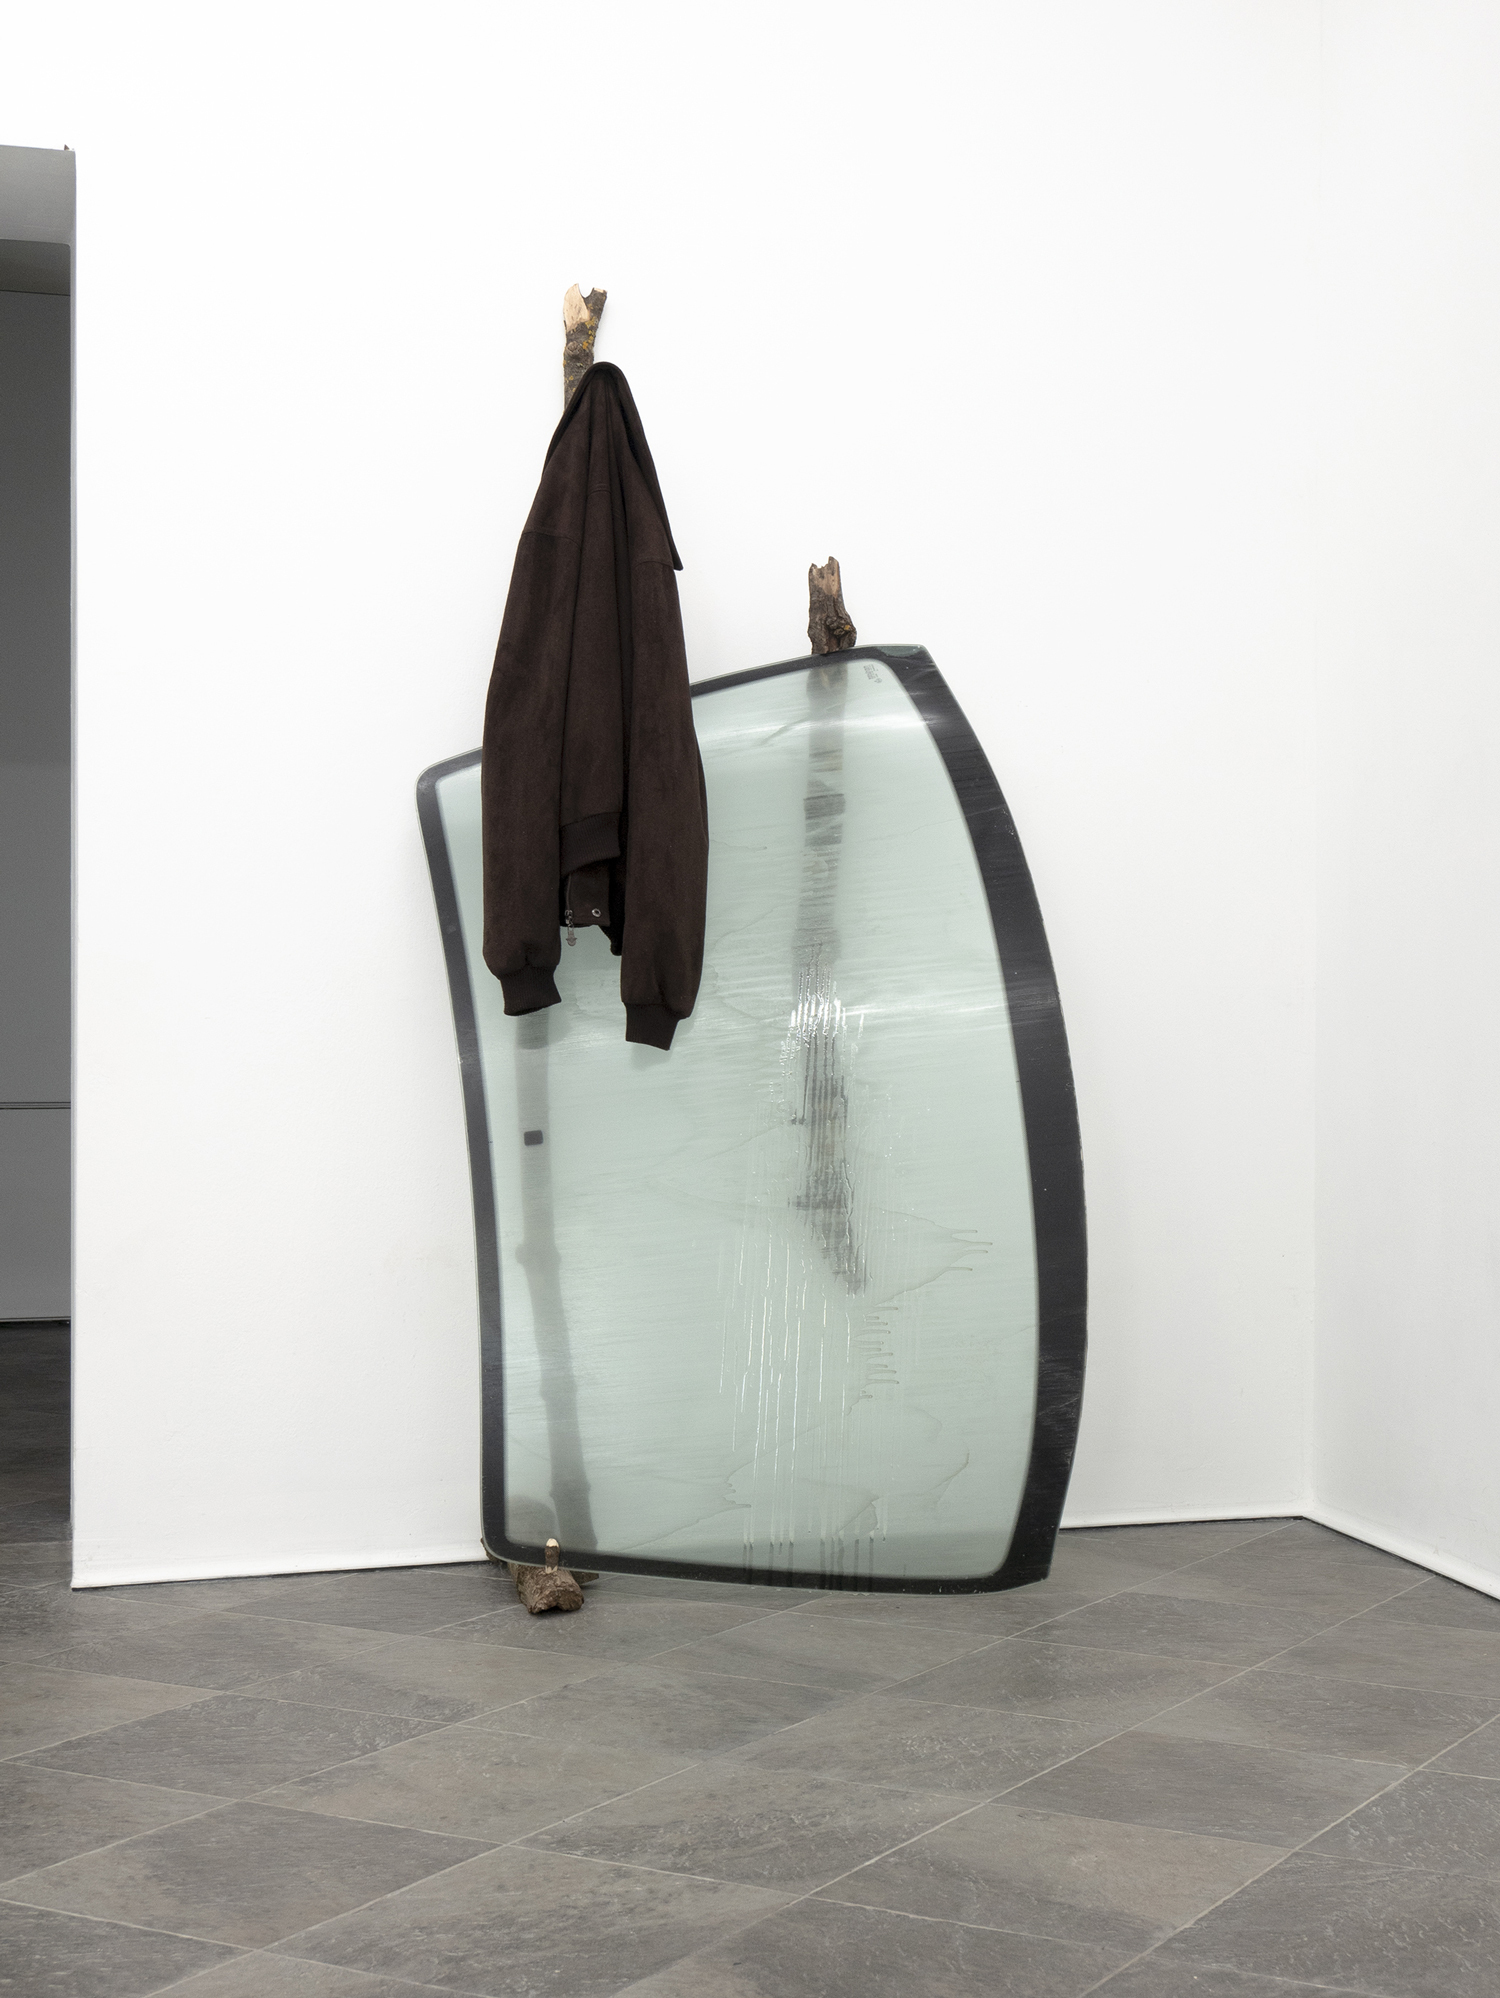 mystic, fogged figure in the distance; 2022; wood, glass, epoxy resin, pigment, jacket; 187 x 94 x 44 cm.